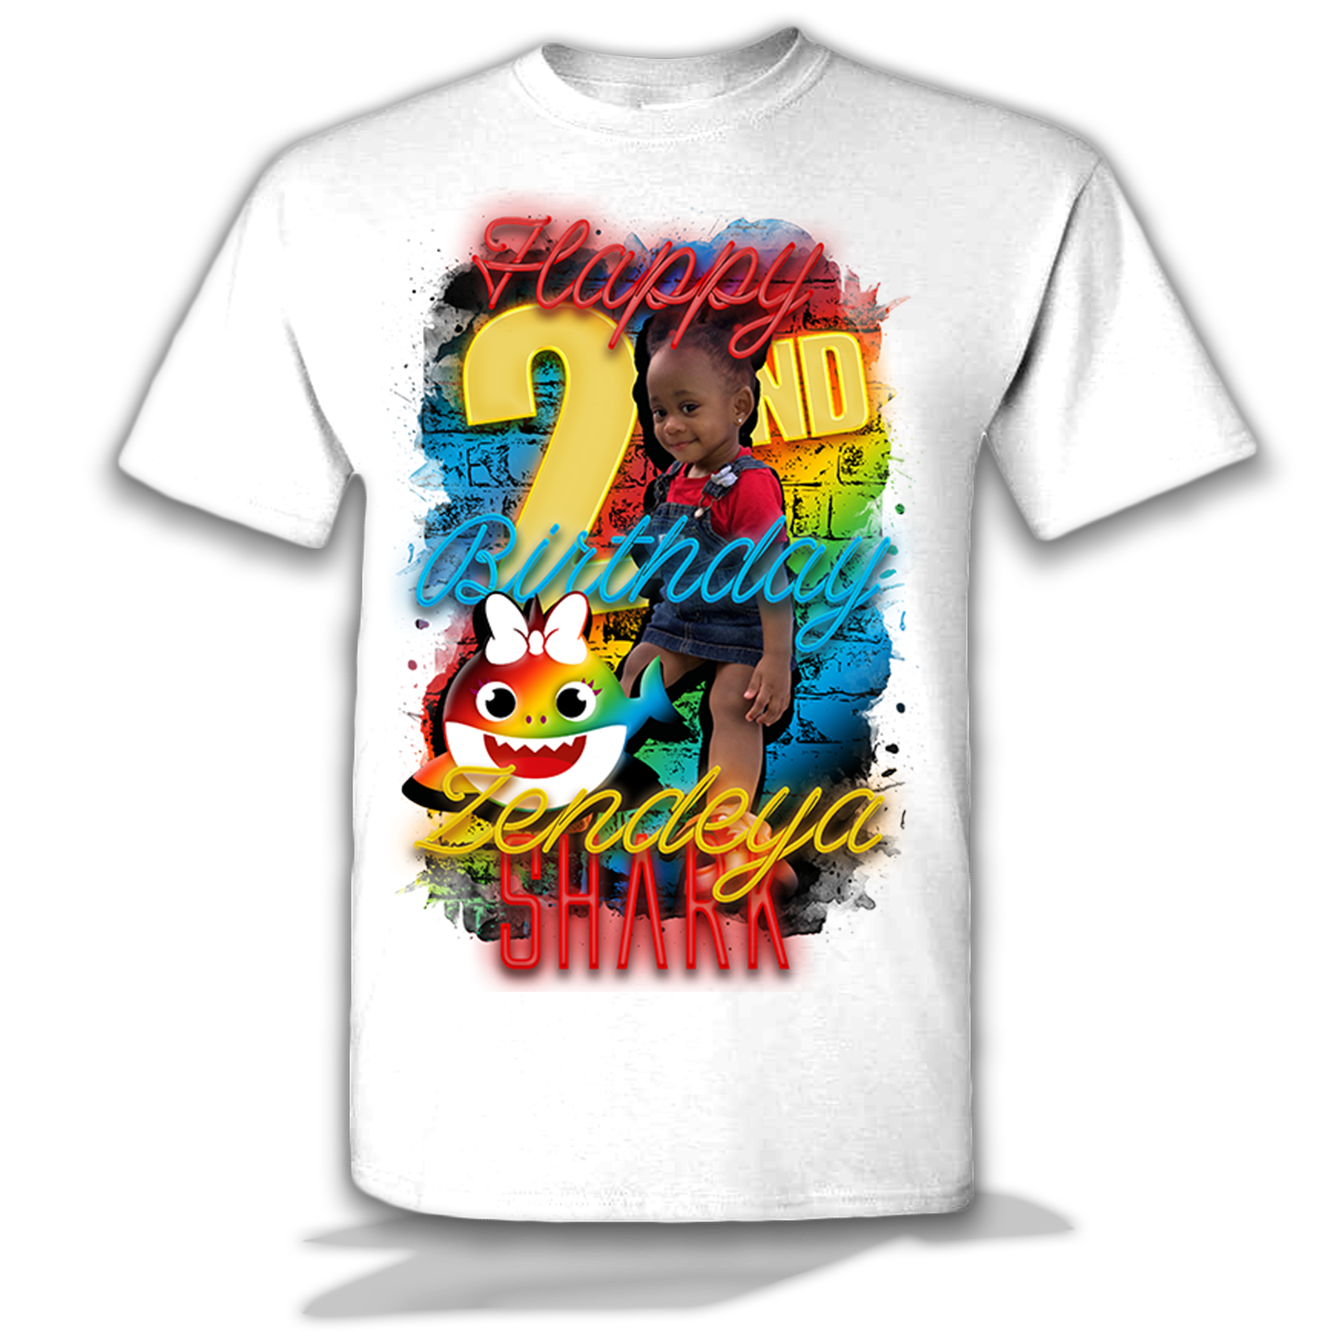 Exclusive "Brick wall"  Middle Design Birthday Shirt